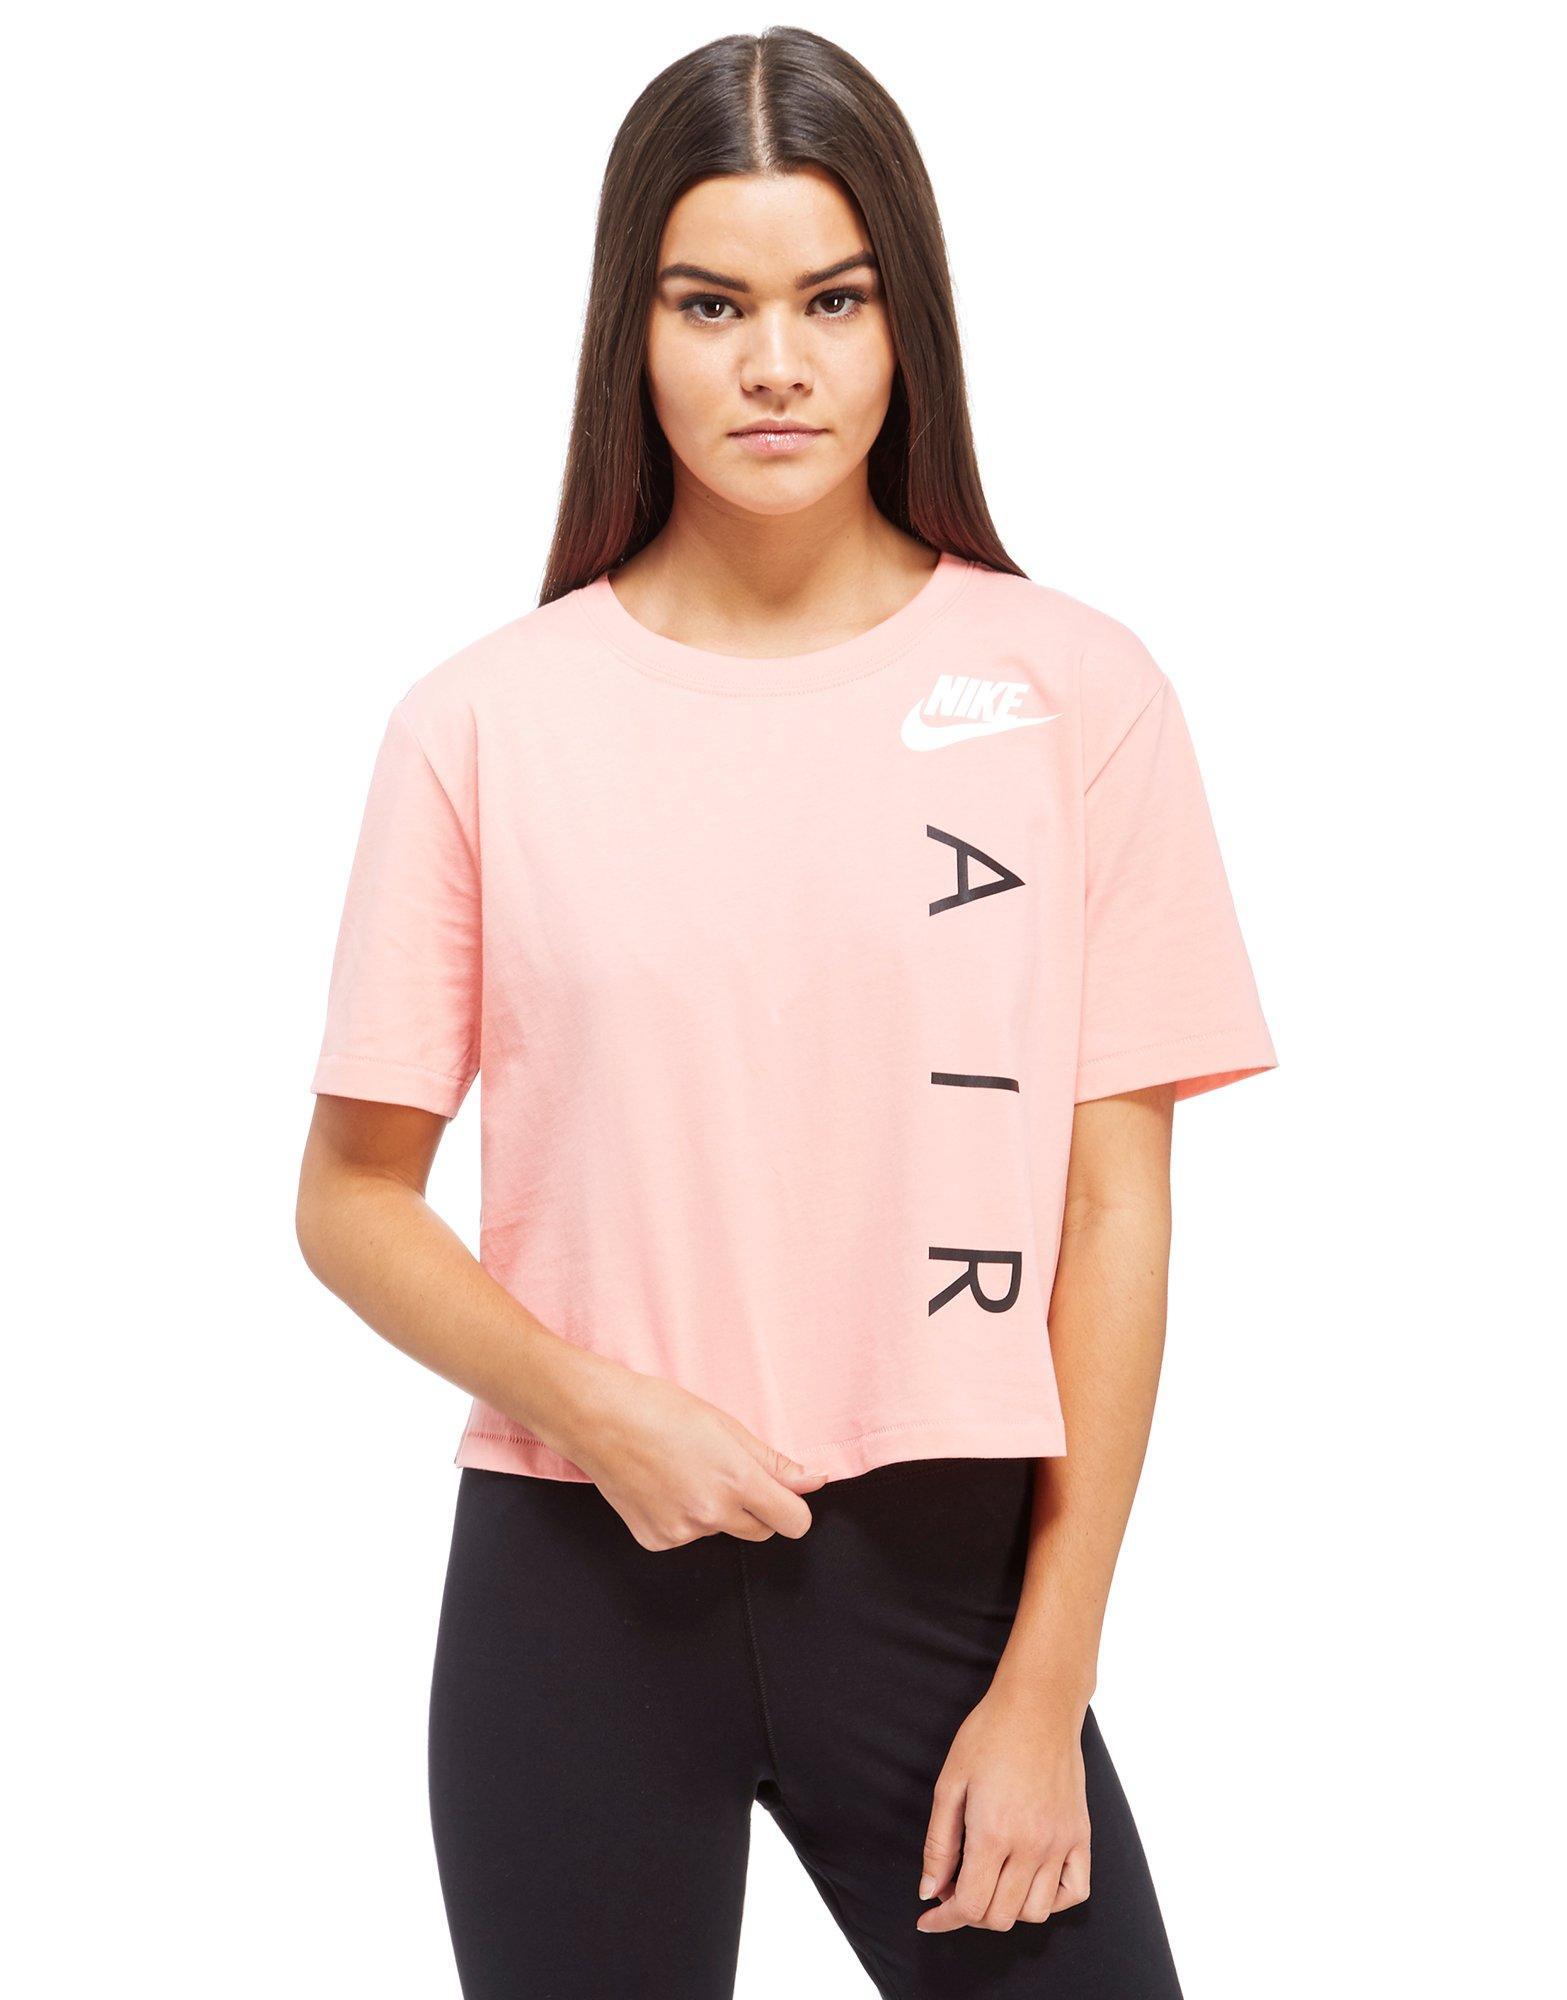 Nike Cotton Air Crop T-shirt in Pink - Lyst